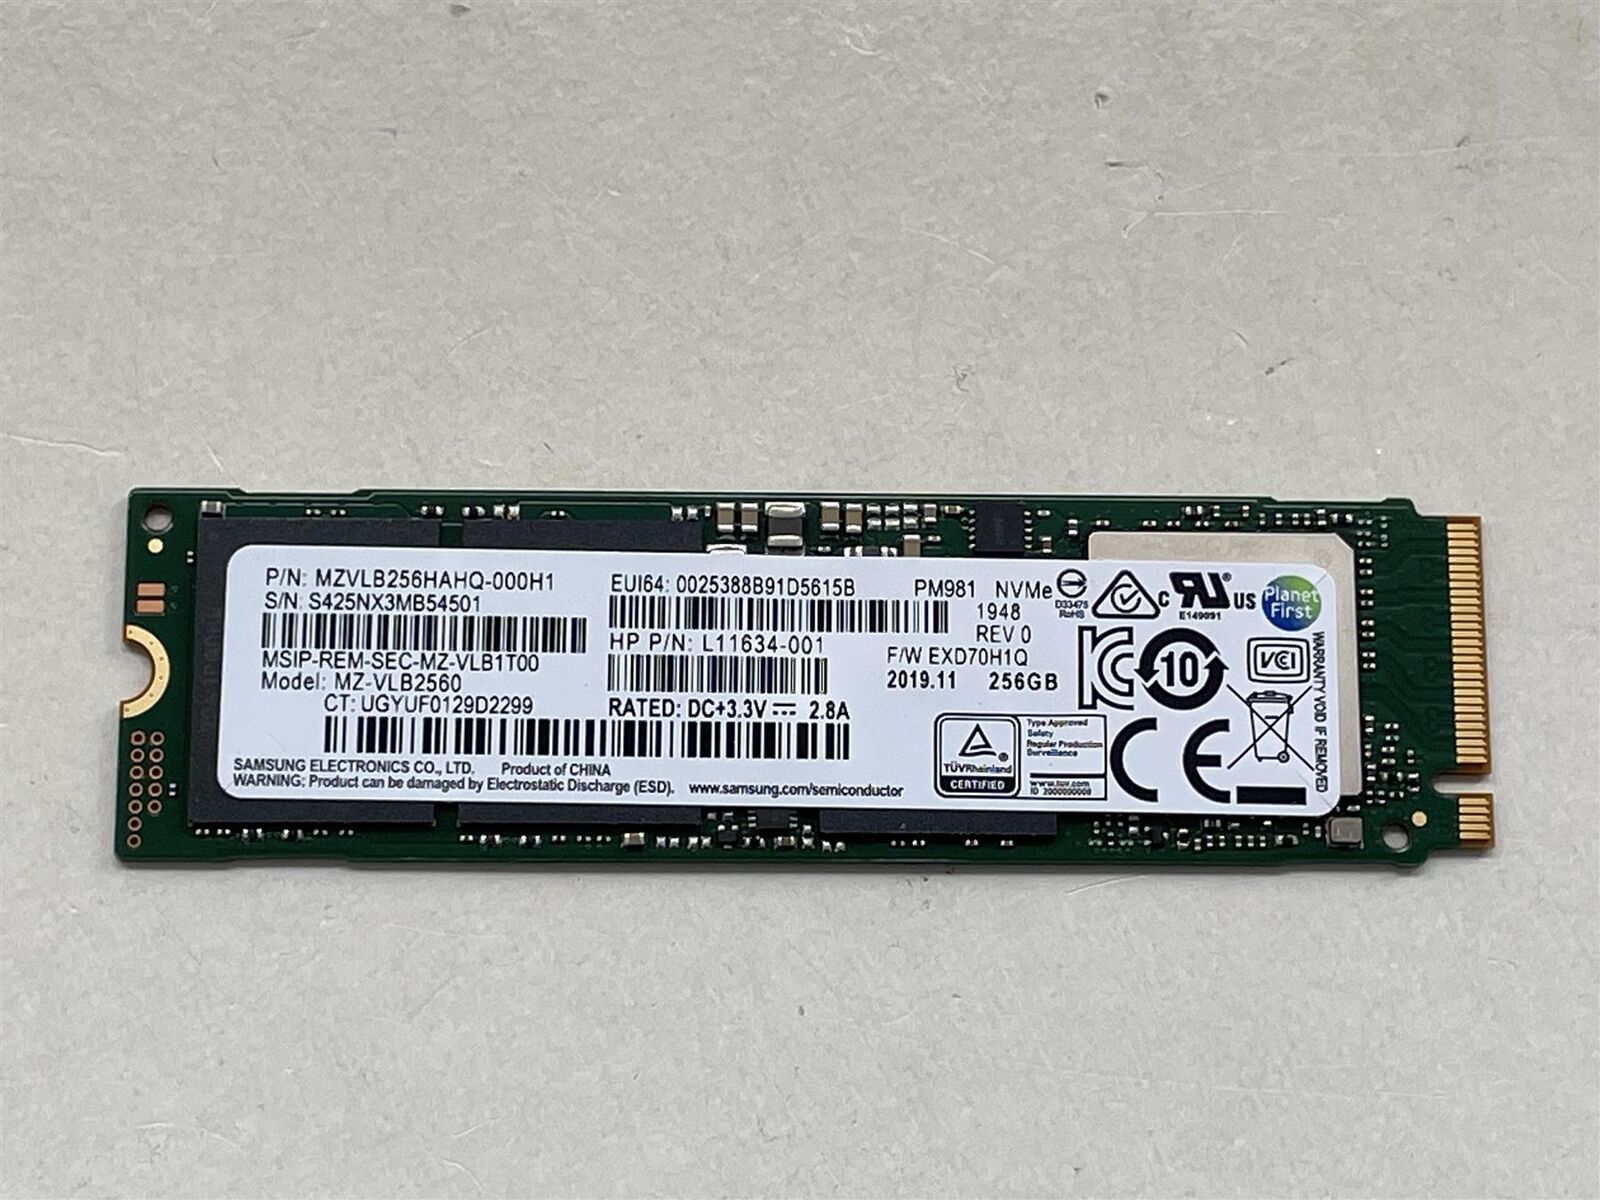 For HP L87133-001 Samsung MZ-VLB2560 256GB PM981 NVMe m.2 SSD Solid State Drive